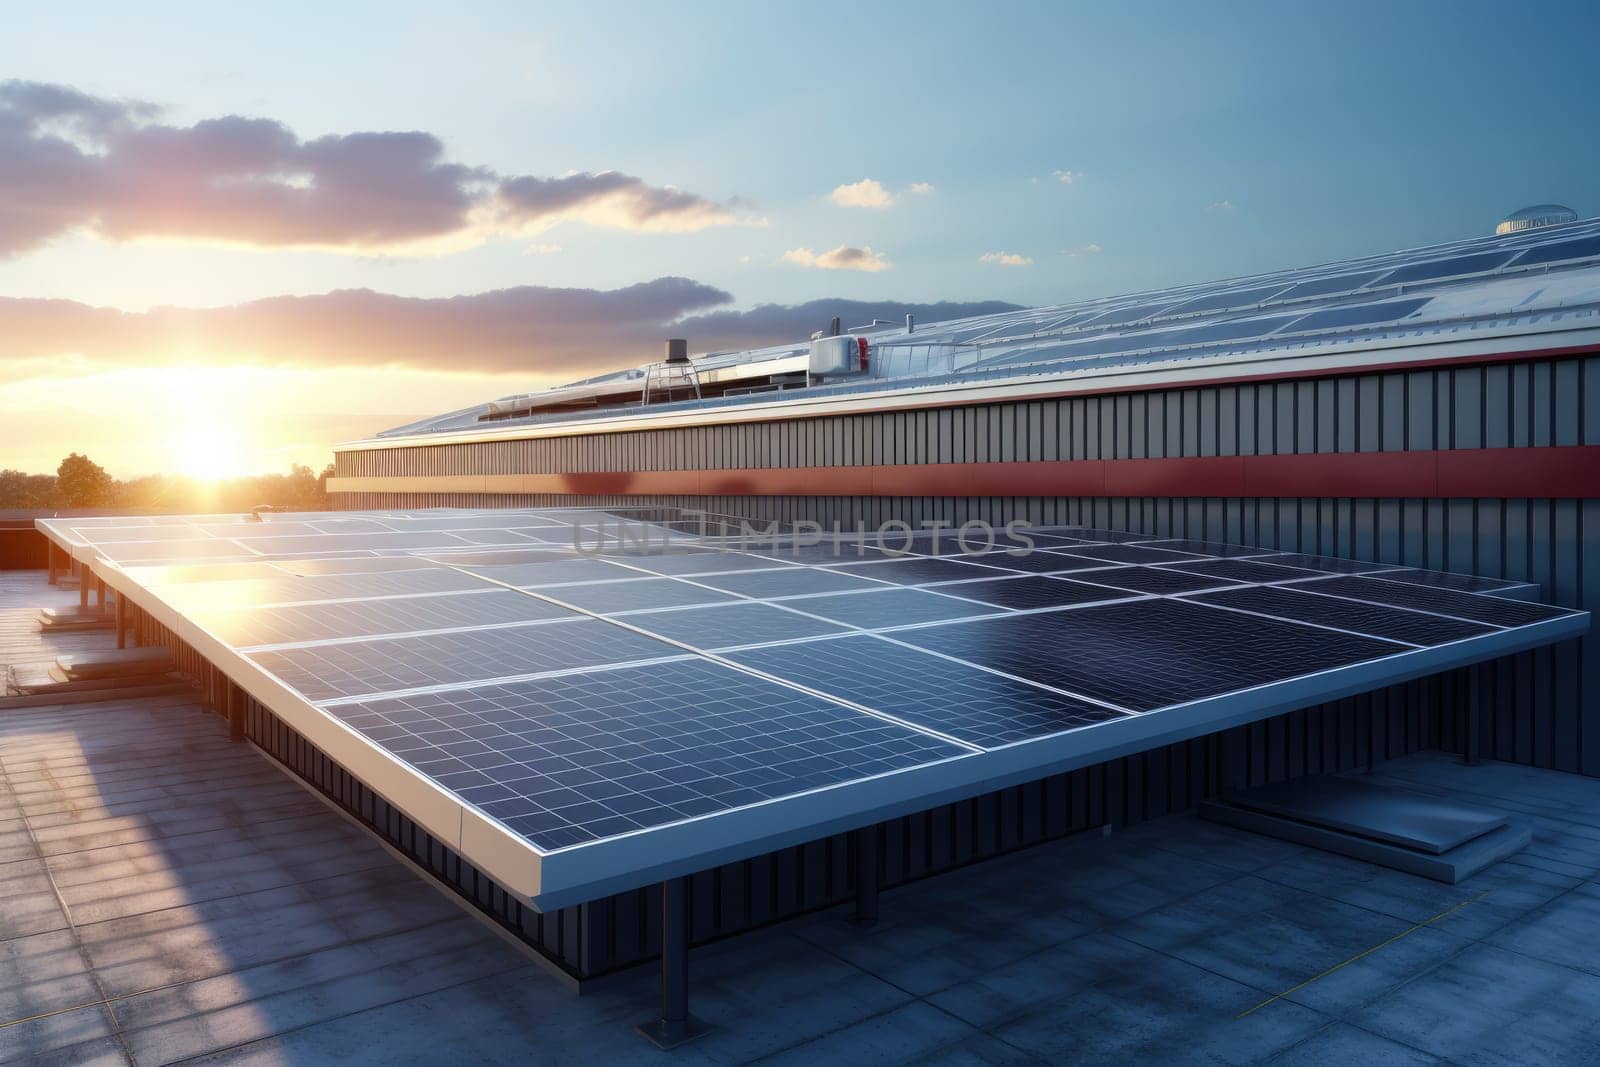 A row of solar panels installed on the roof of an industrial building, harnessing sunlight to generate renewable energy and promoting sustainability and environmental consciousness.